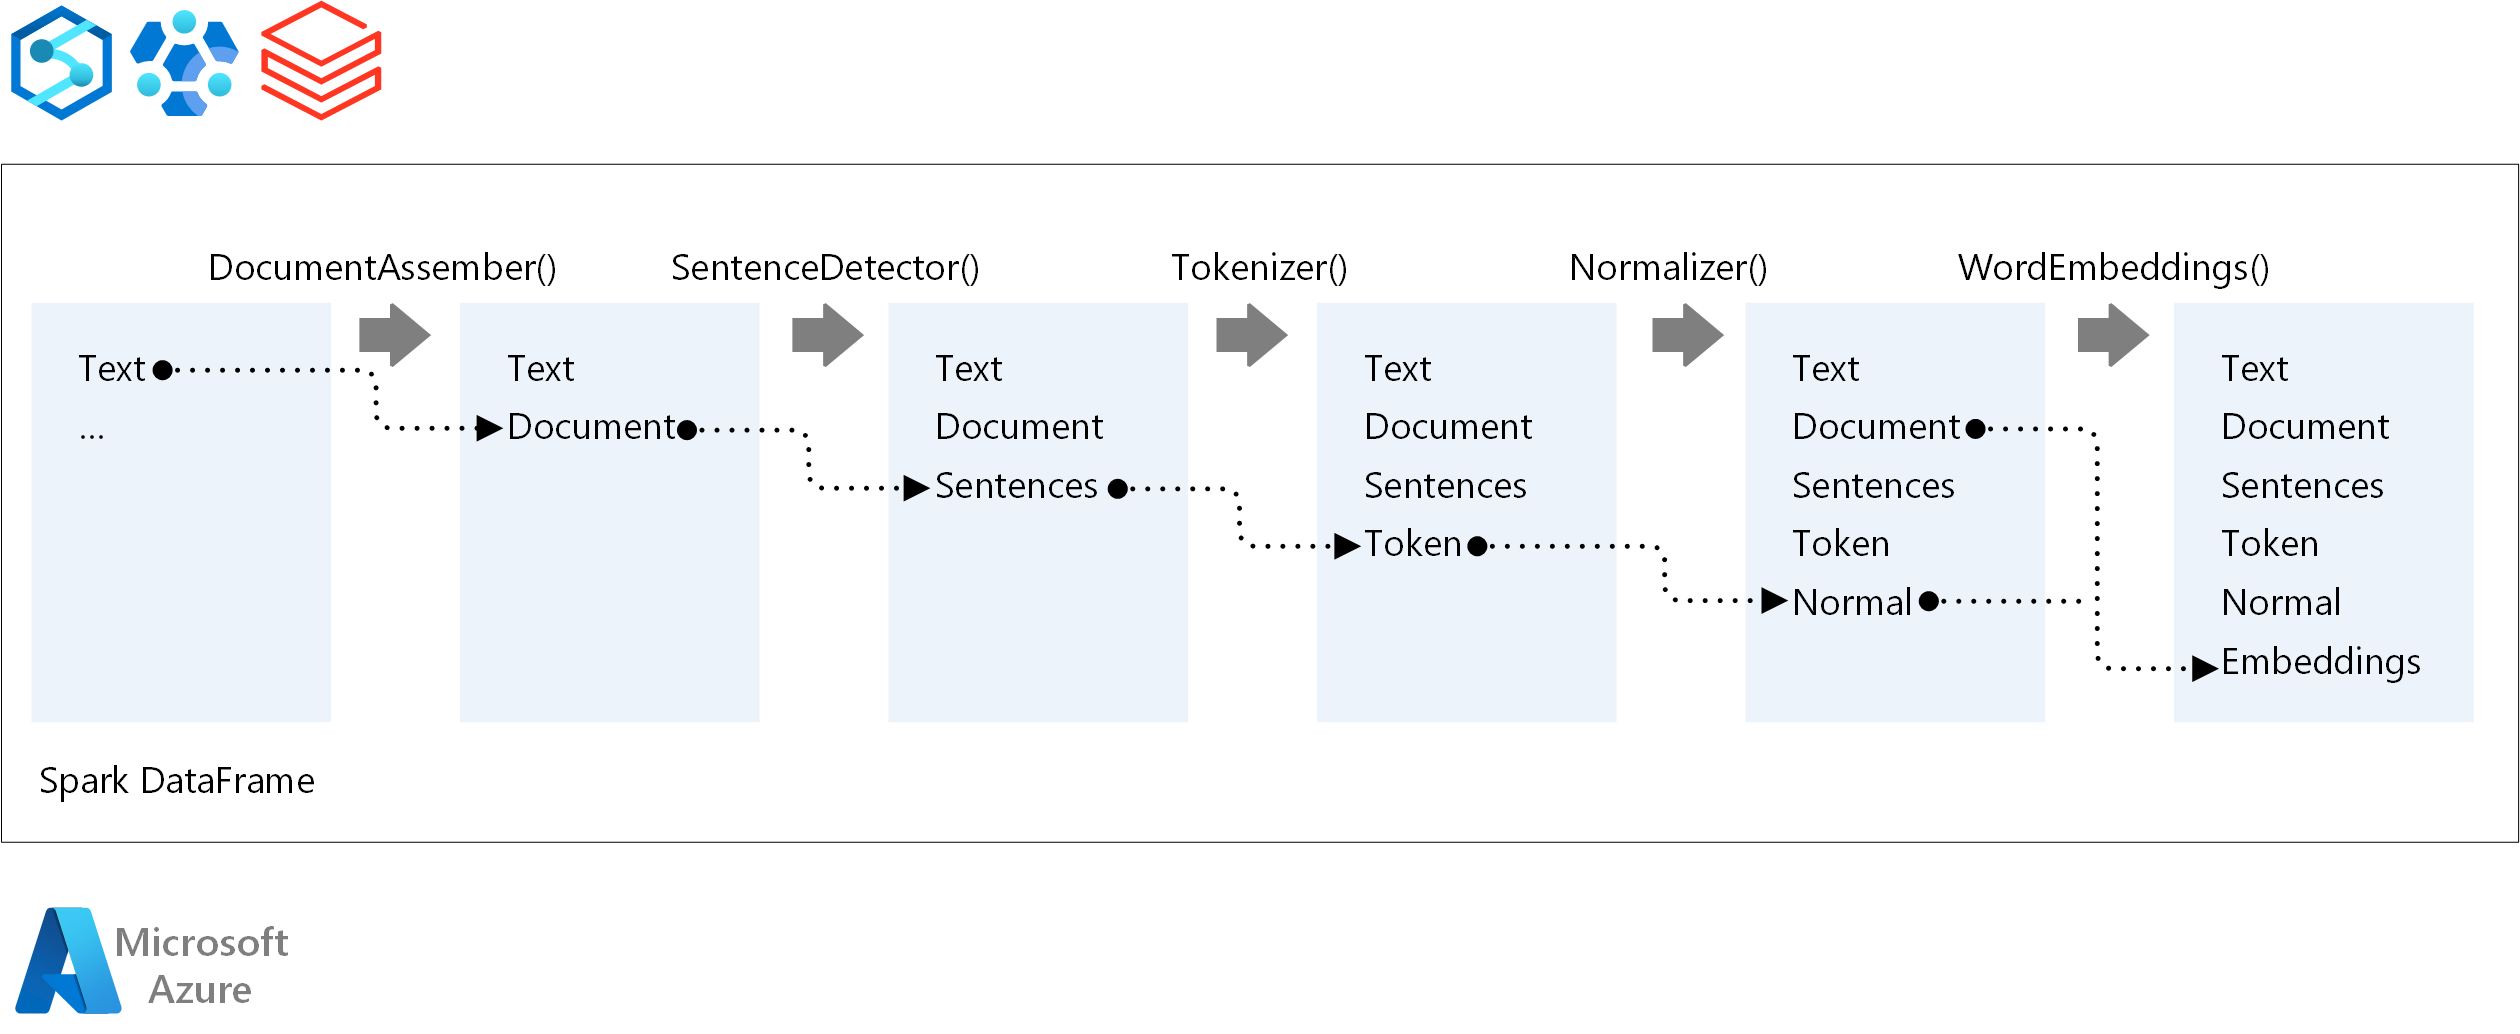 Diagram that shows N L P pipeline stages, such as document assembly, sentence detection, tokenization, normalization, and word embedding.